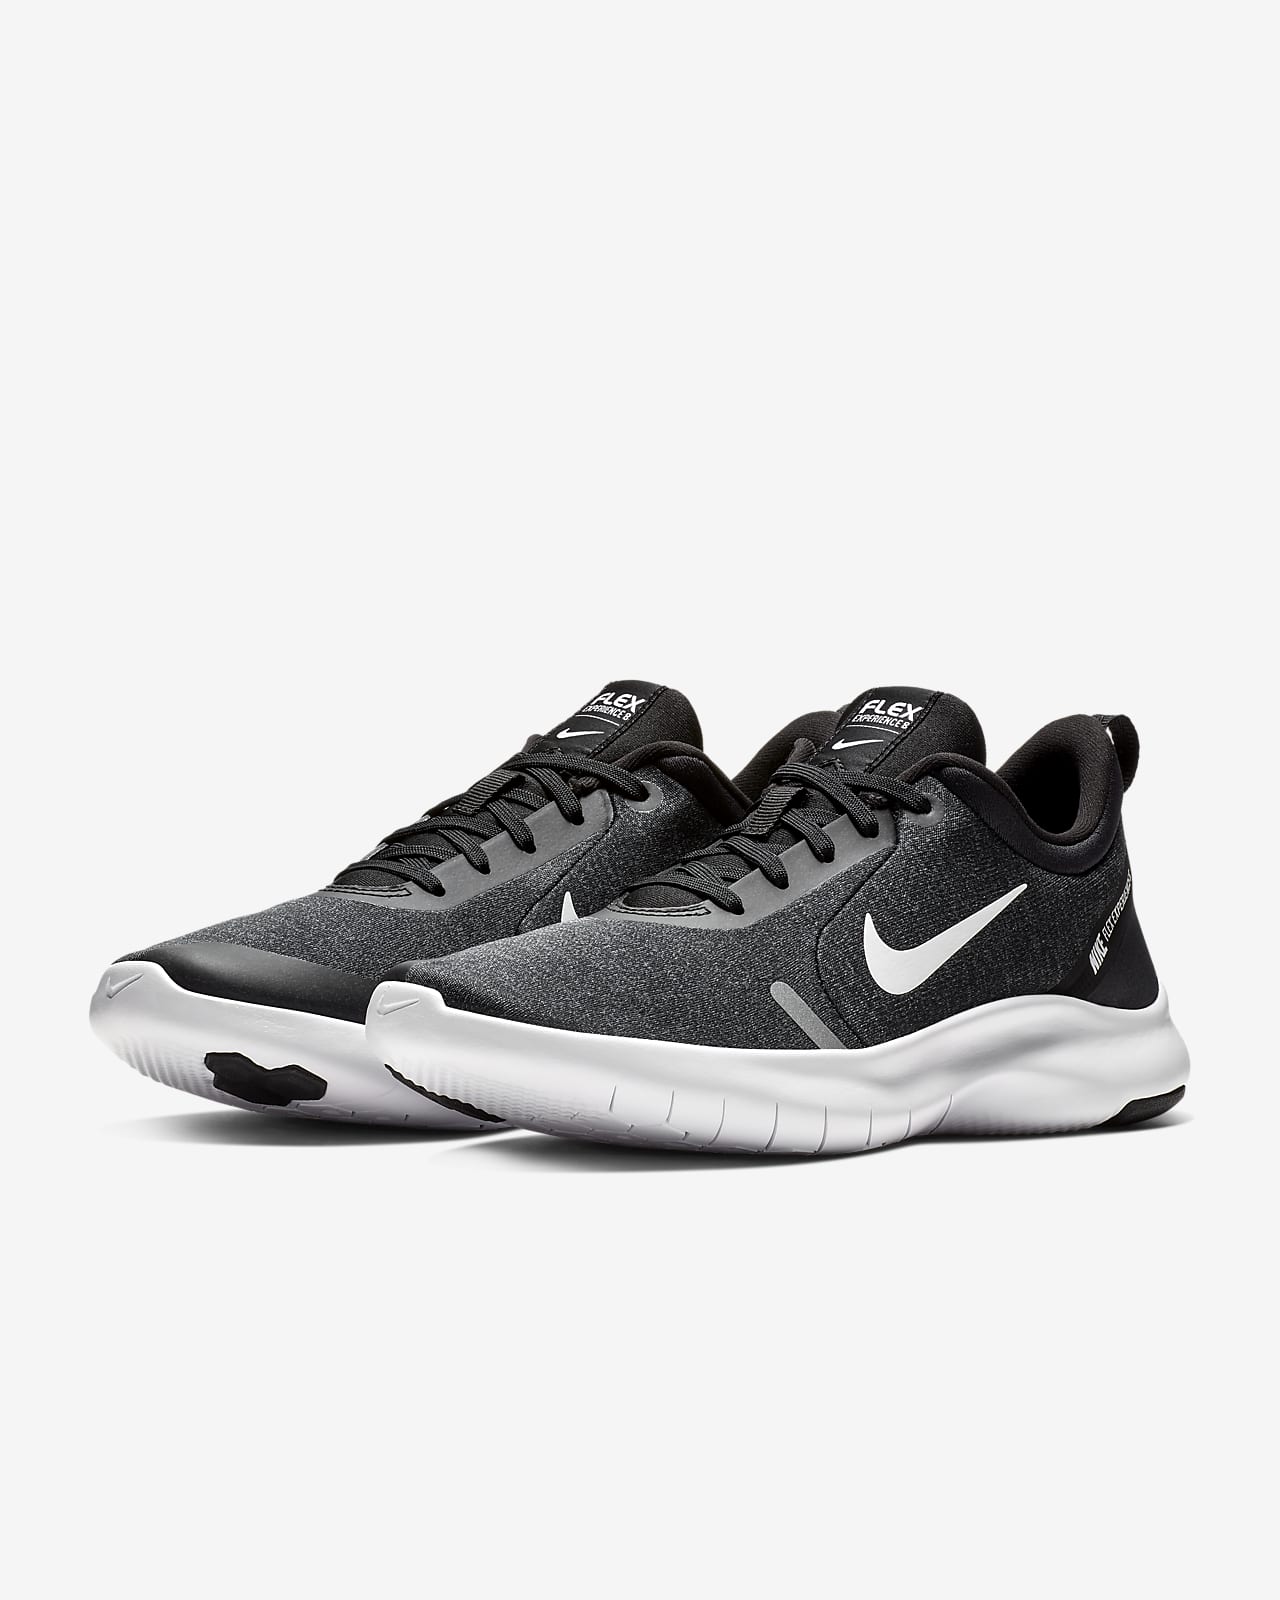 are nike flex experience 8 good for running